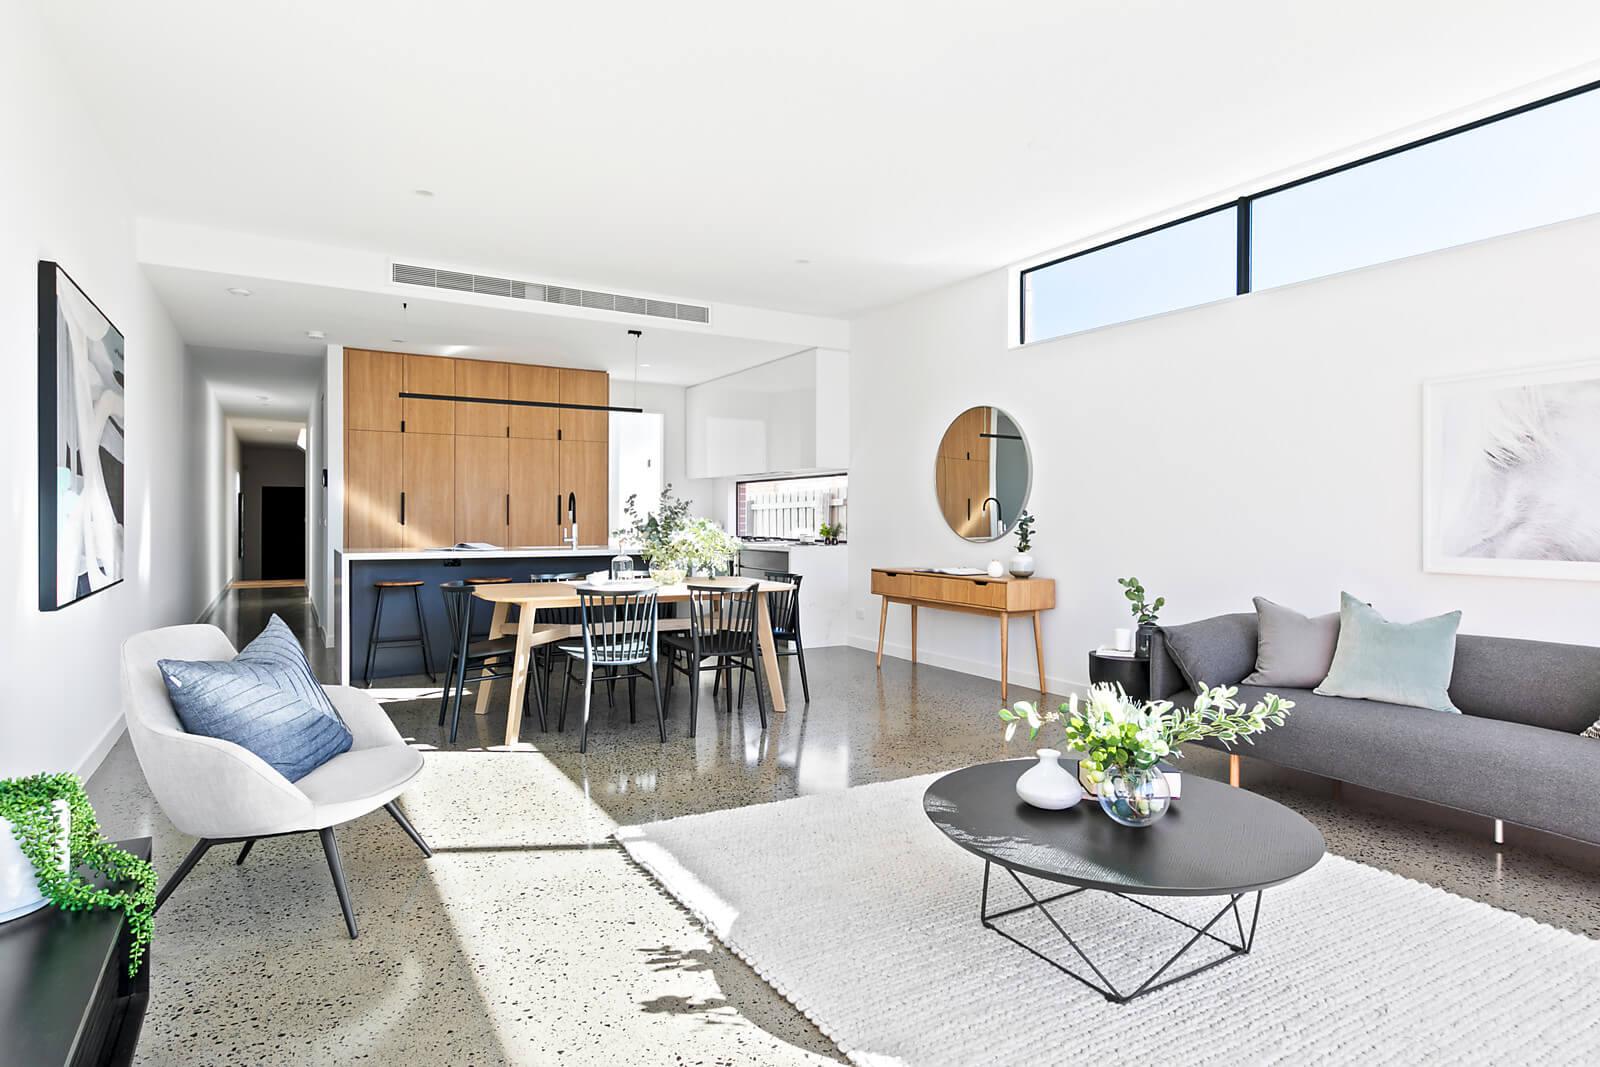 Light filled living room with property styling. Gray toned lounge, armchair and coffee table. Timber kitchen cupboards complemented with timber dining table and console. Green and white floral arrangements.